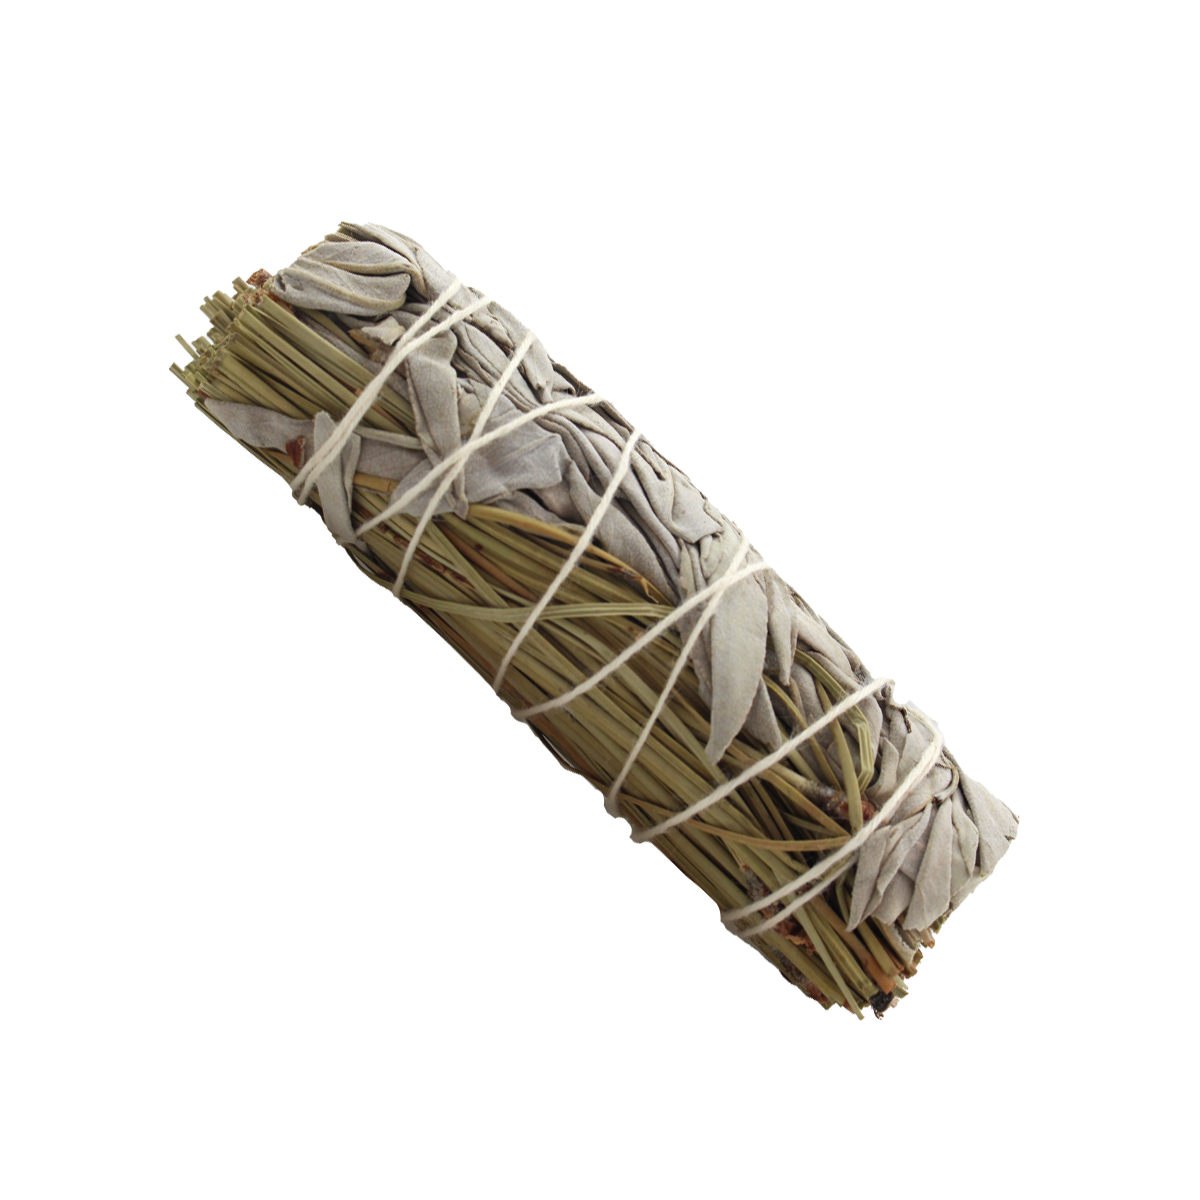 4" wrapped bundle of pine and white sage